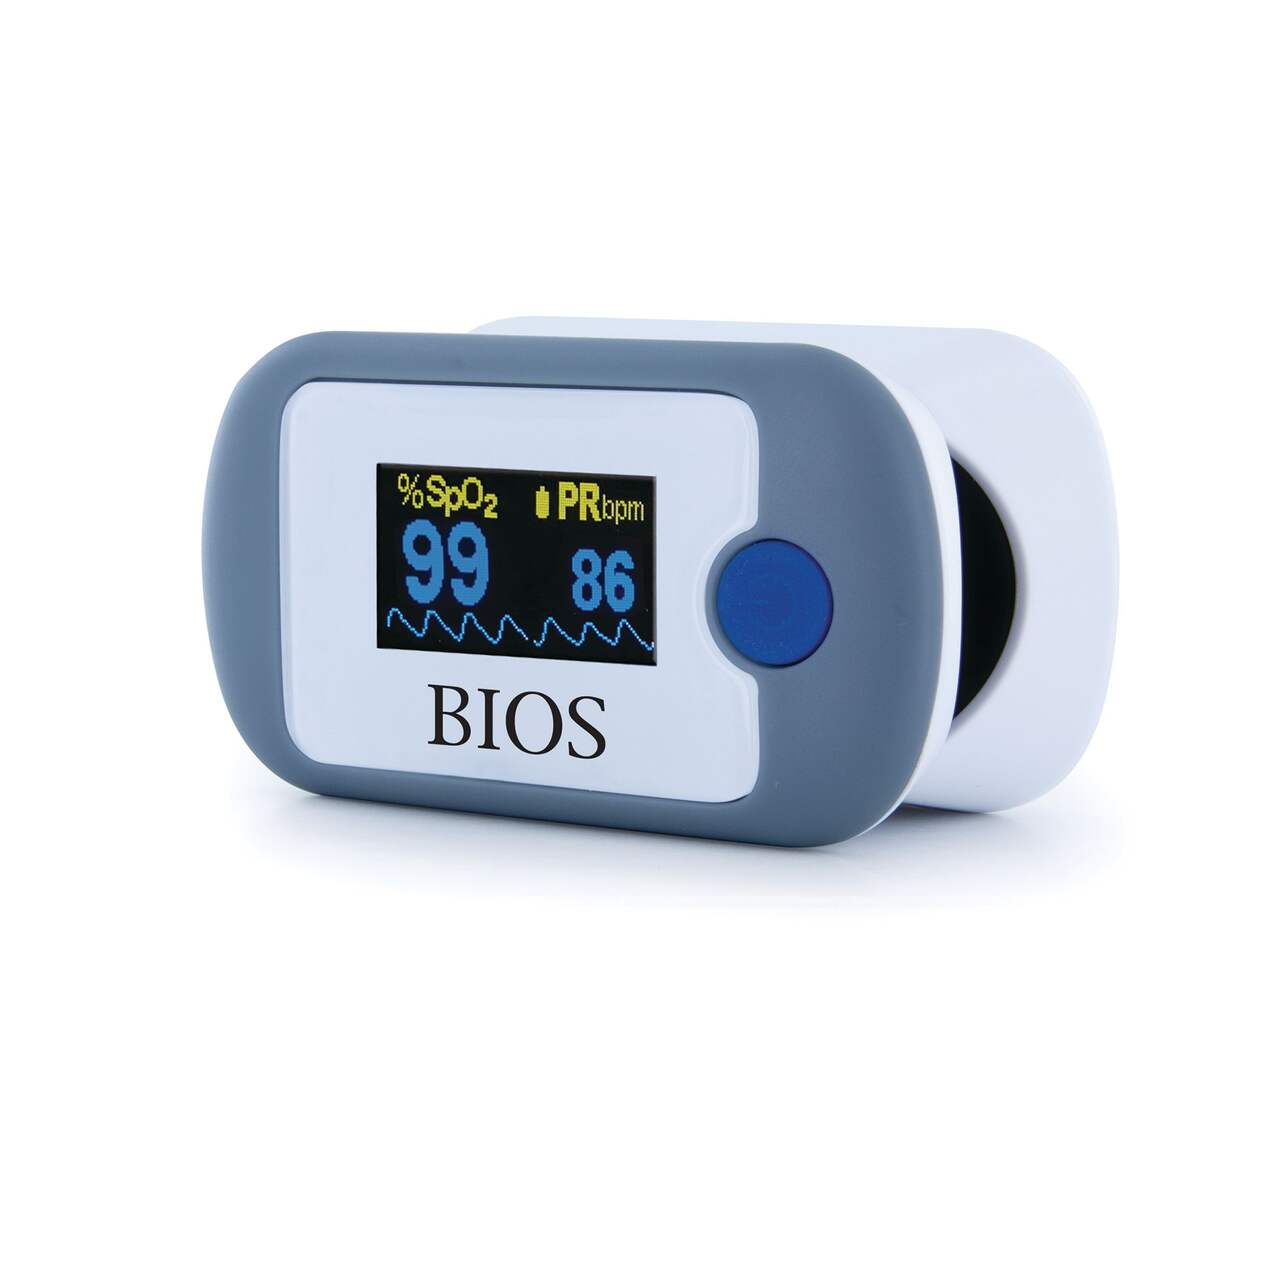 Simply Accurate Premium Plus Automatic Digital Upper Arm Blood Pressure  Monitor with Memory